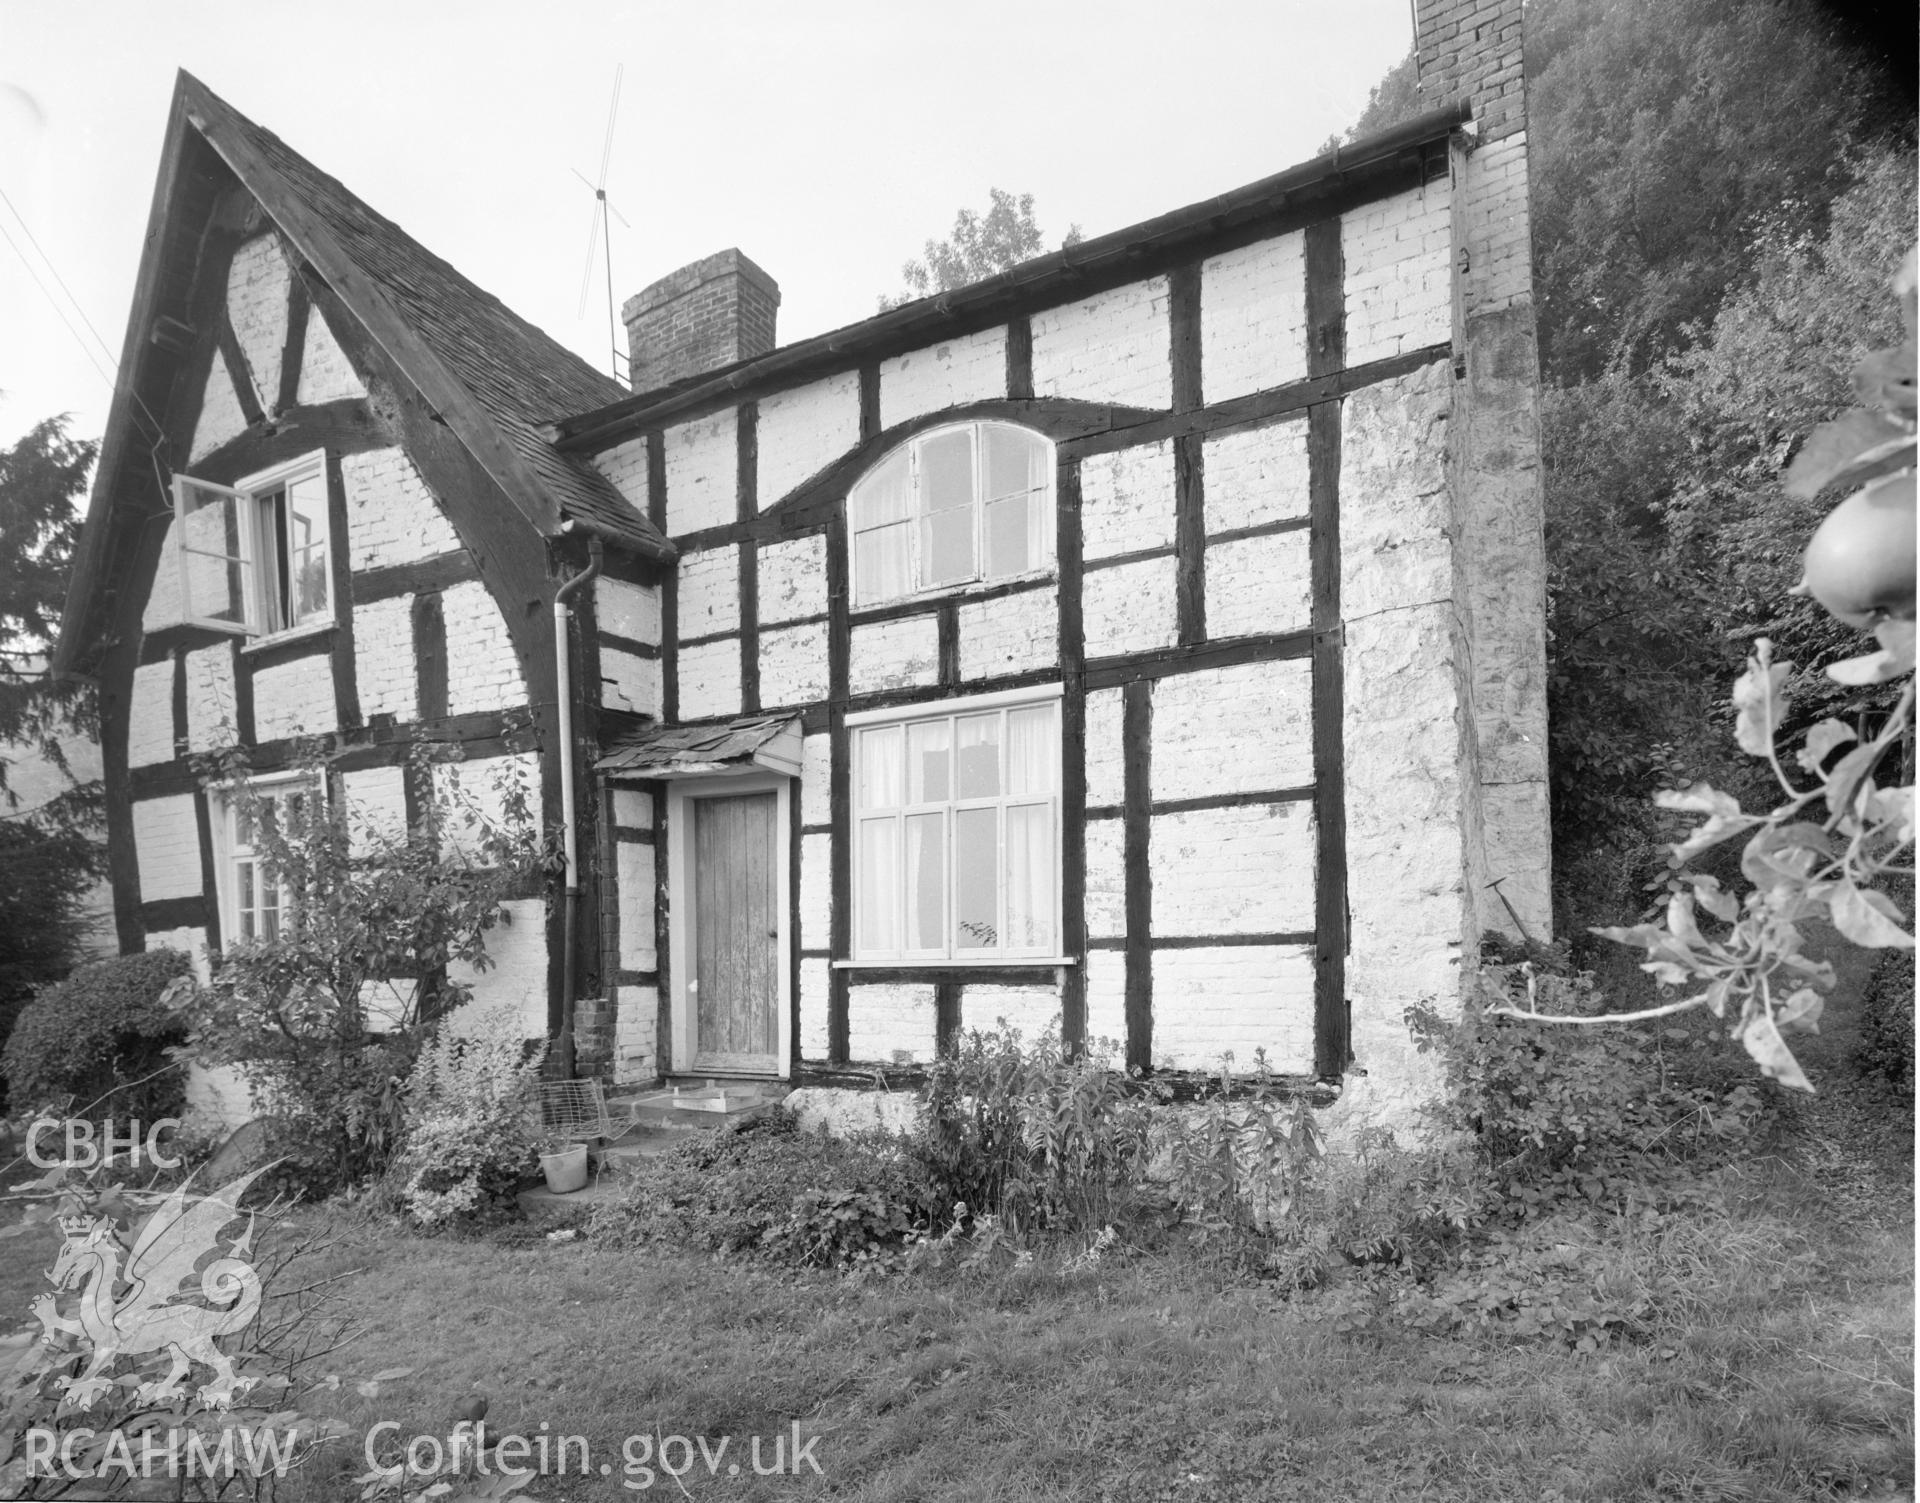 Black and white acetate negative showing exterior view of Llwyn, Llandrinio.